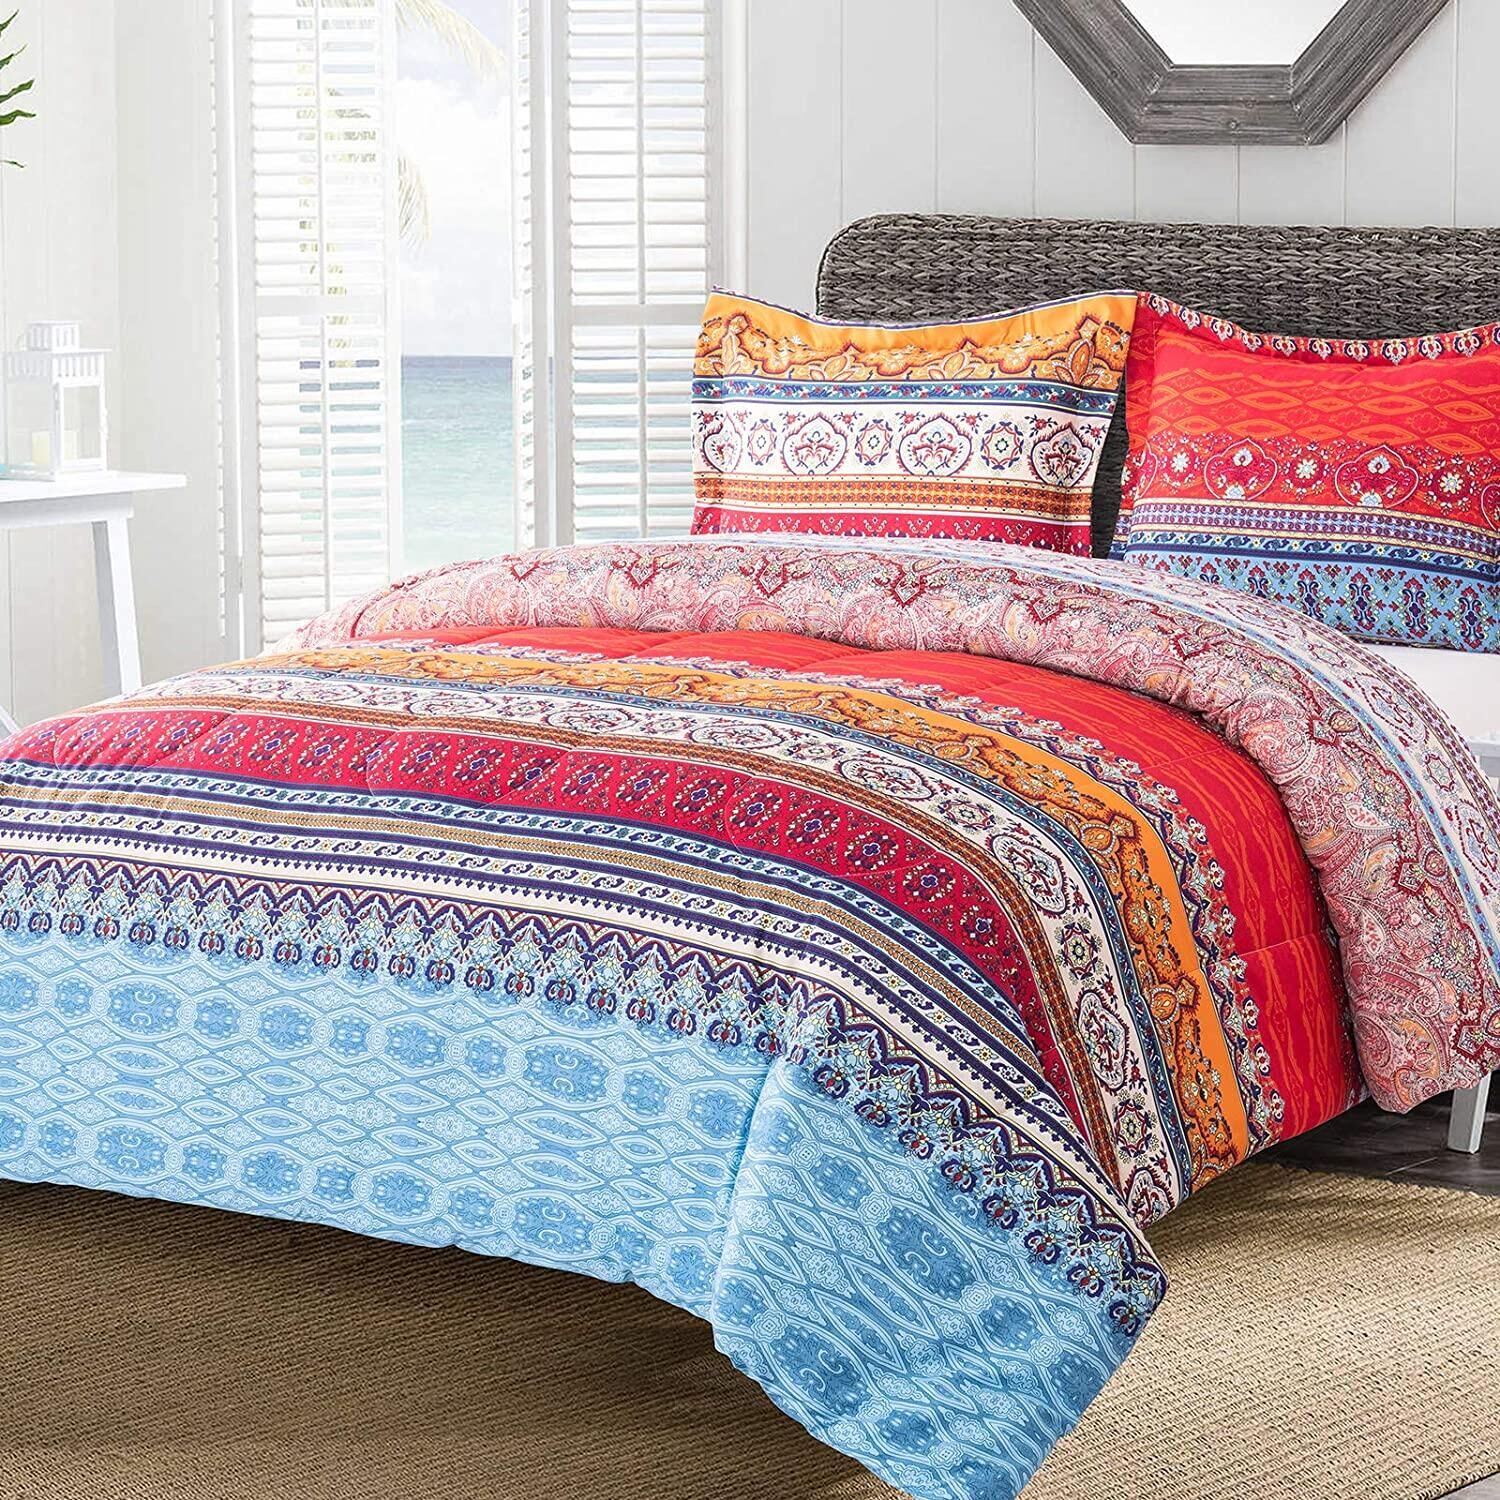 Shatex Queen Size Bed Comforter 3 Pieces Bedding Comforter Sets Bohemian Stripe Comforter Set – Ultra Soft 100% Microfiber Polyester 大丰被子三件套